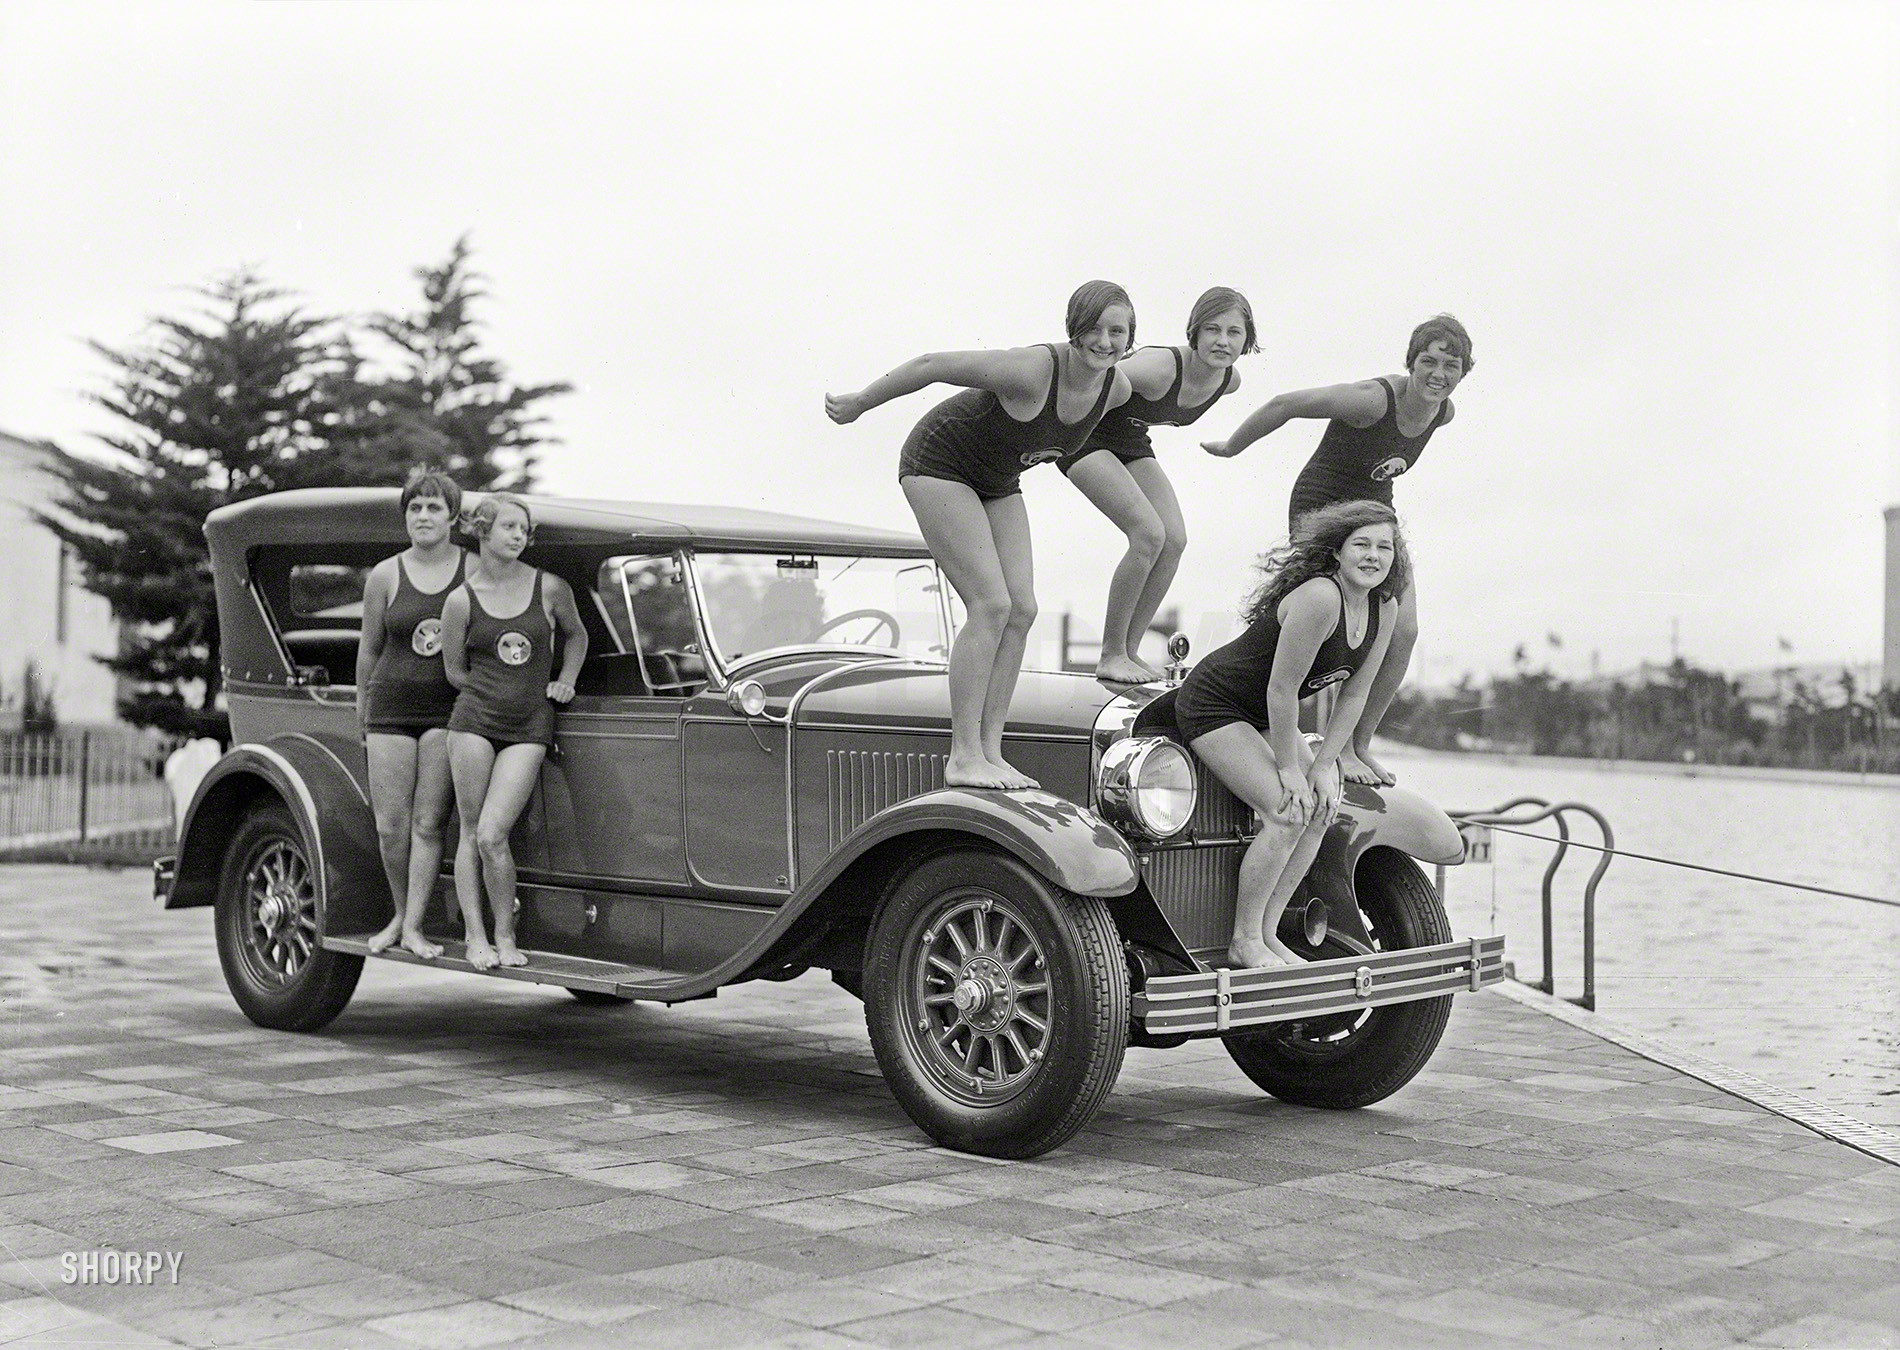 San Francisco circa 1927. "Cadillac and swimmers at Fleishhacker Pool." 5x7 glass negative formerly of the Wyland Stanley collection. View full size.